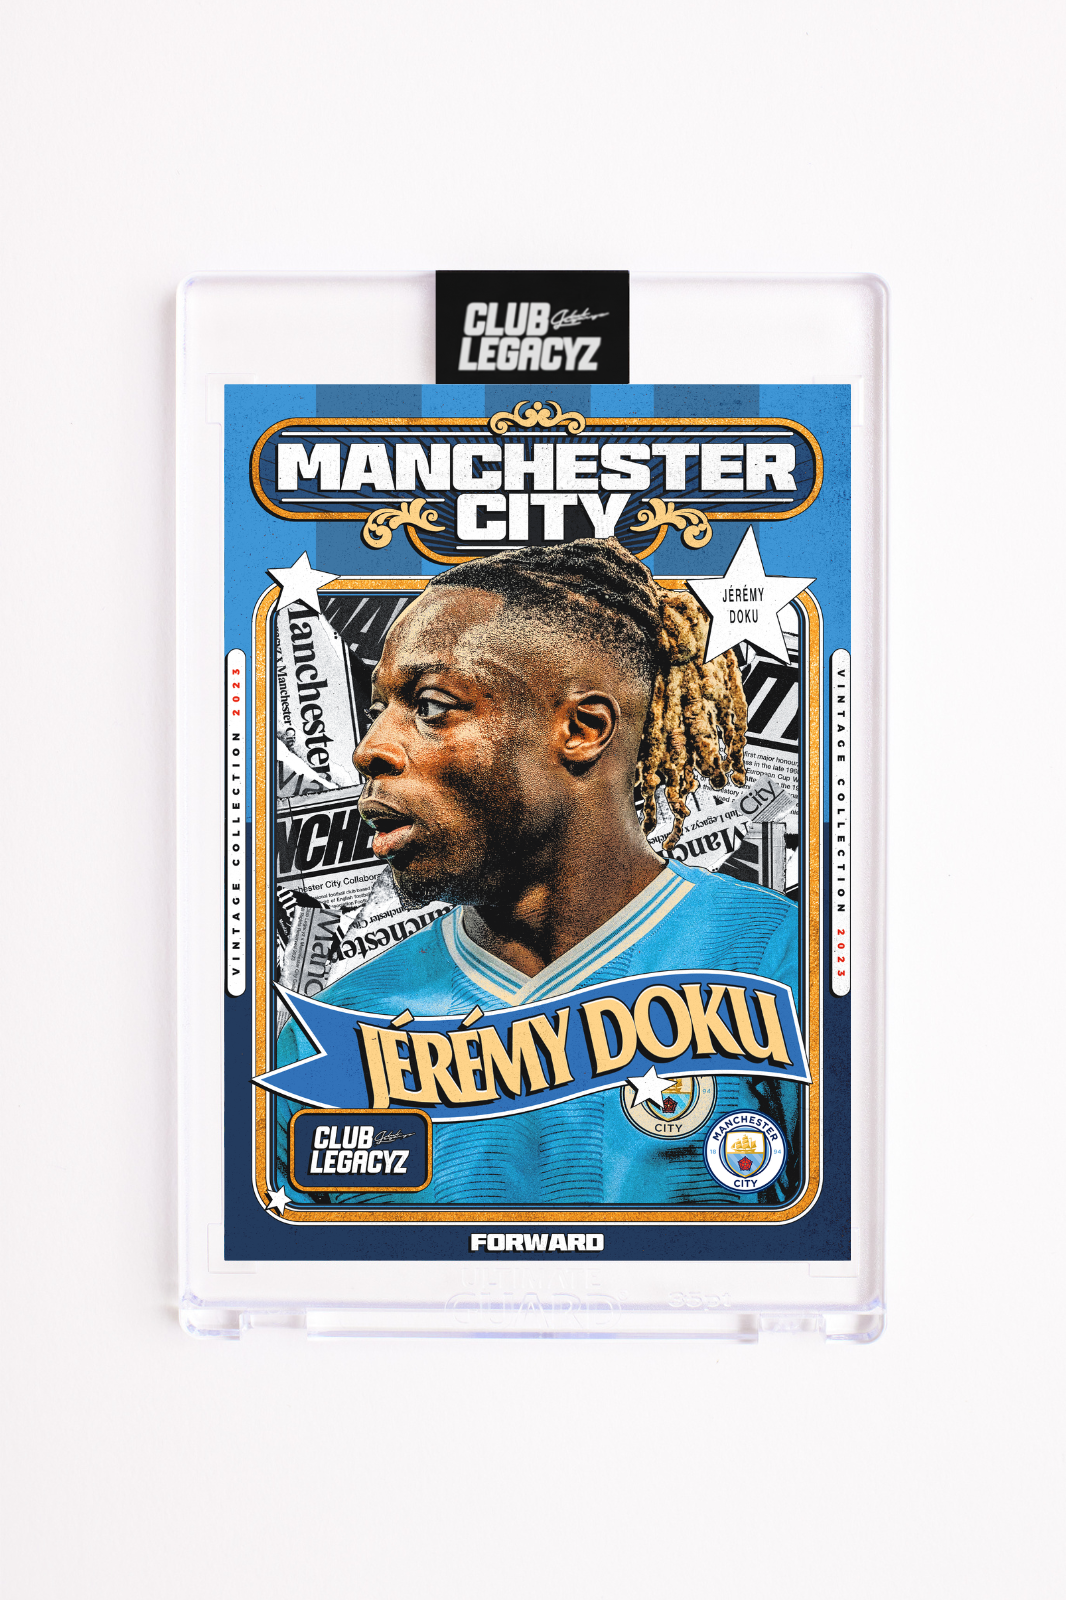 Manchester City - Retro Collection full set